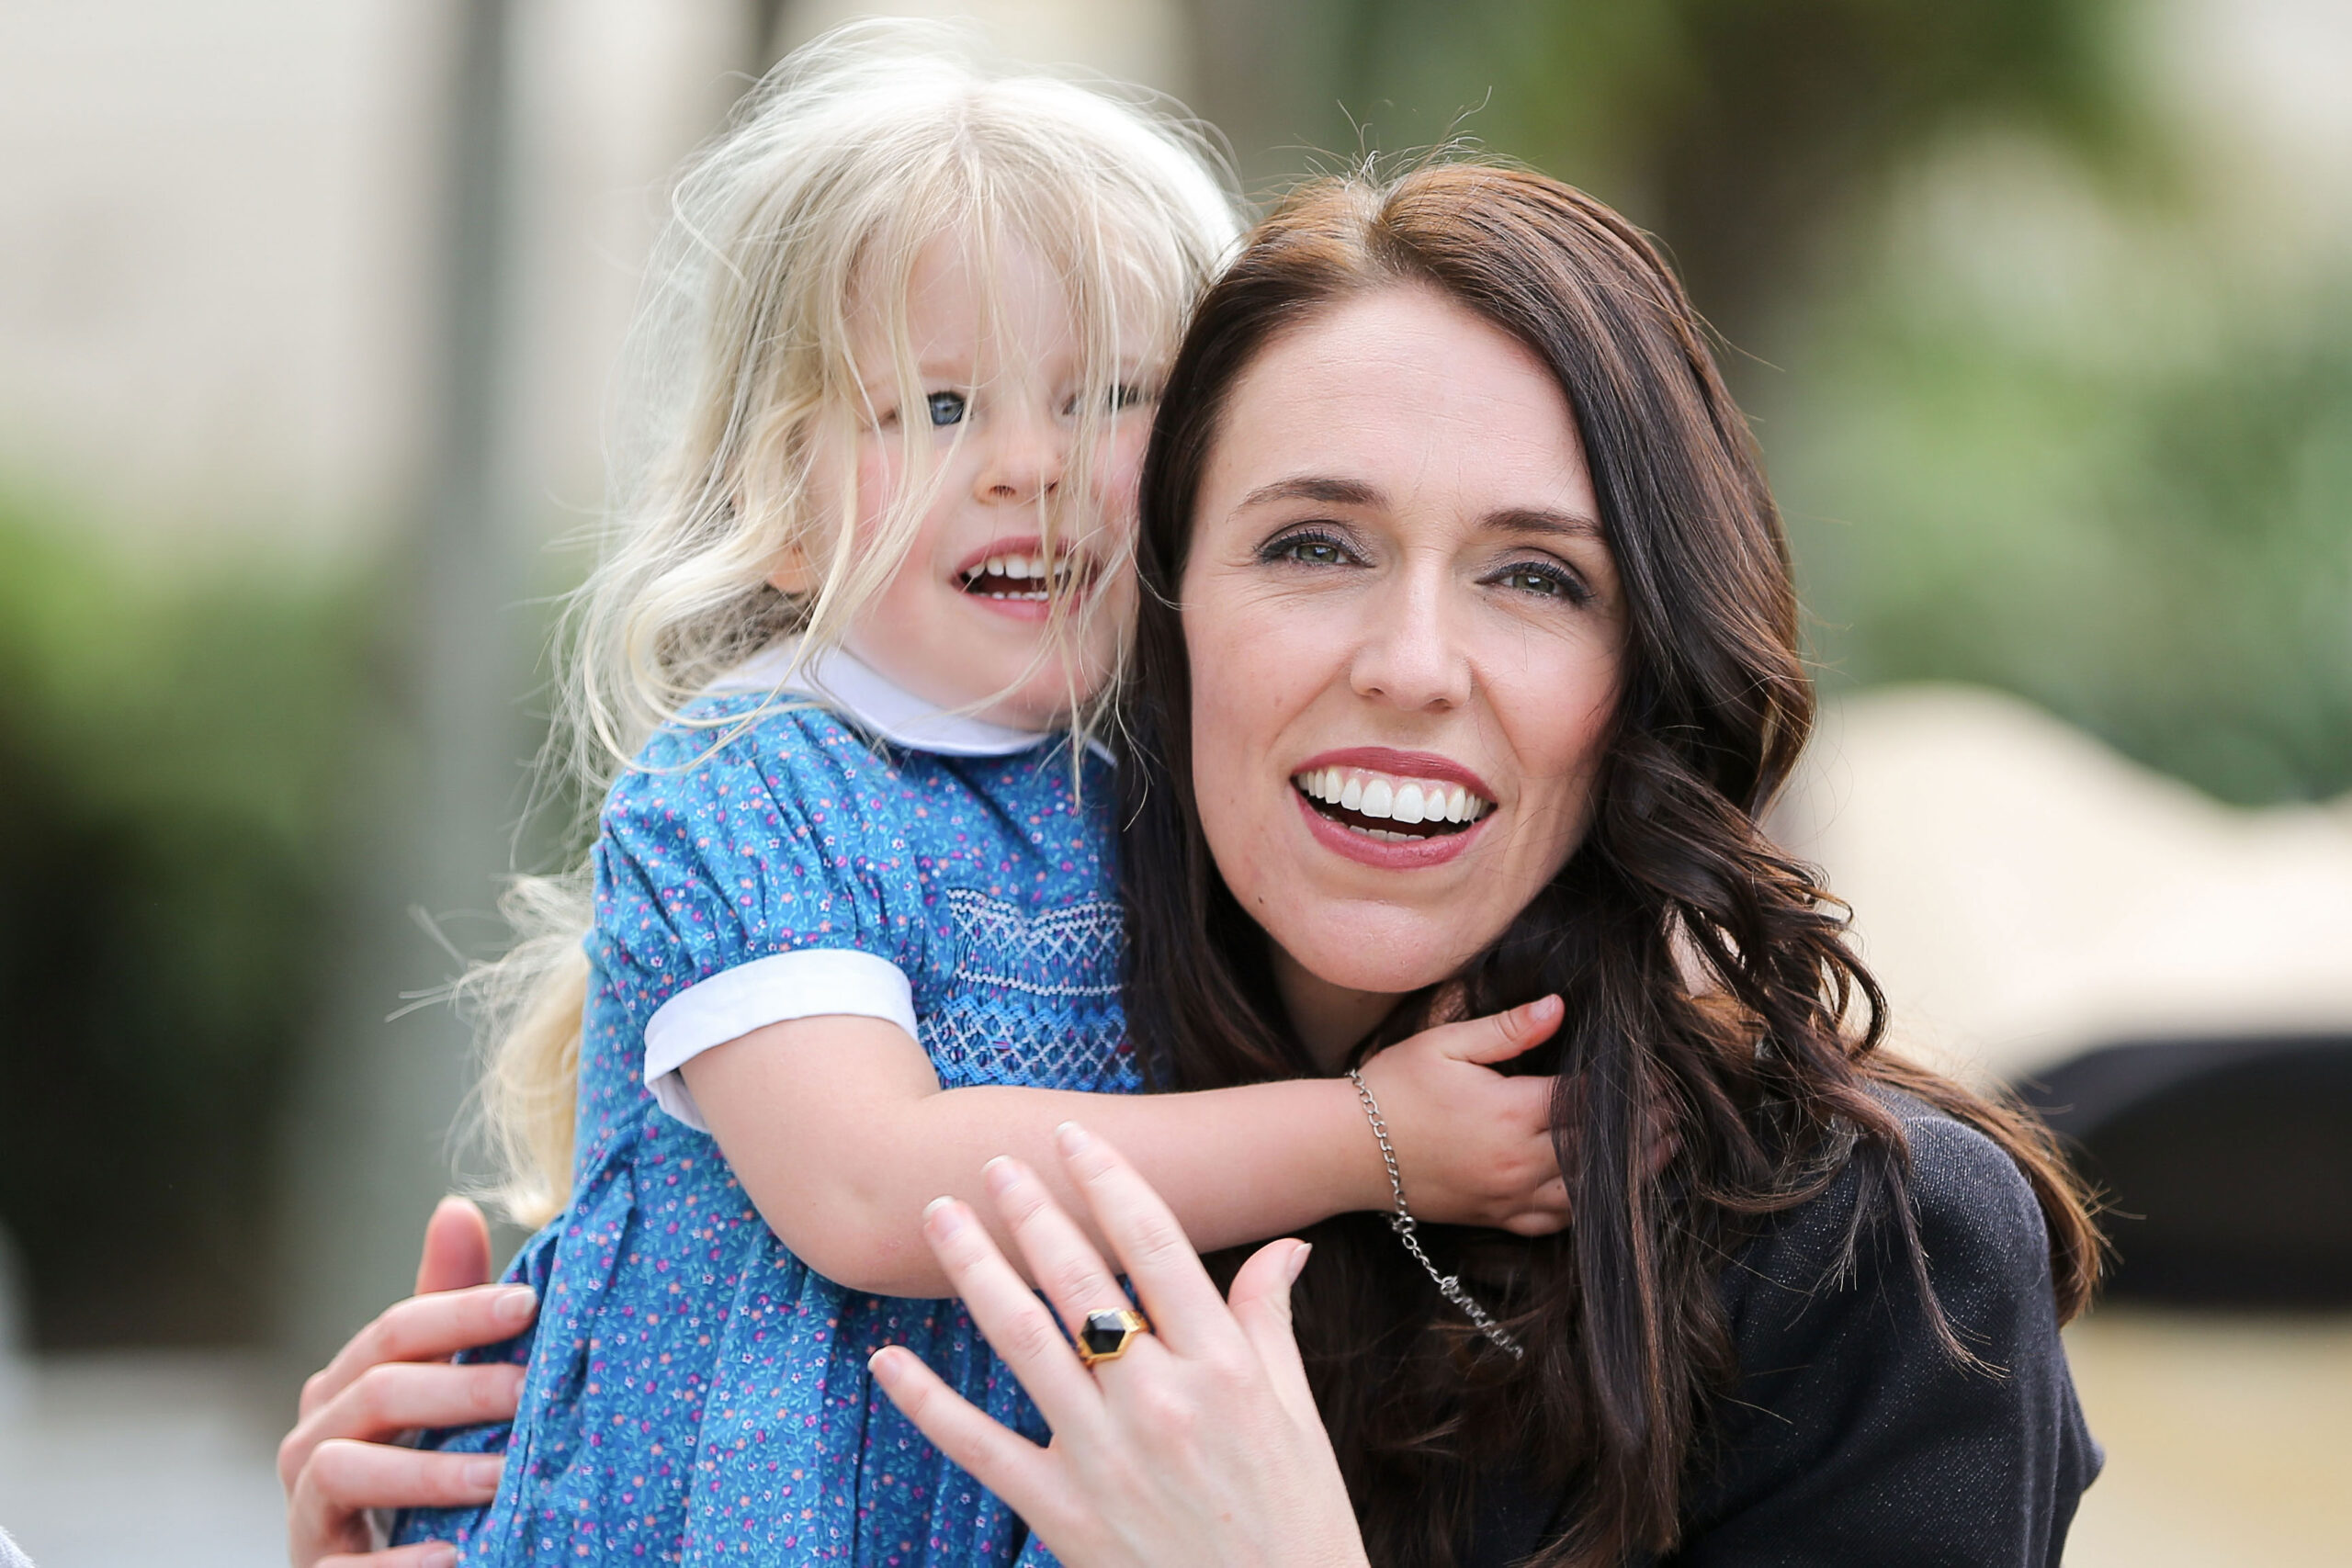 Jacinda Ardern’s niece helps with Christmas card to The Queen